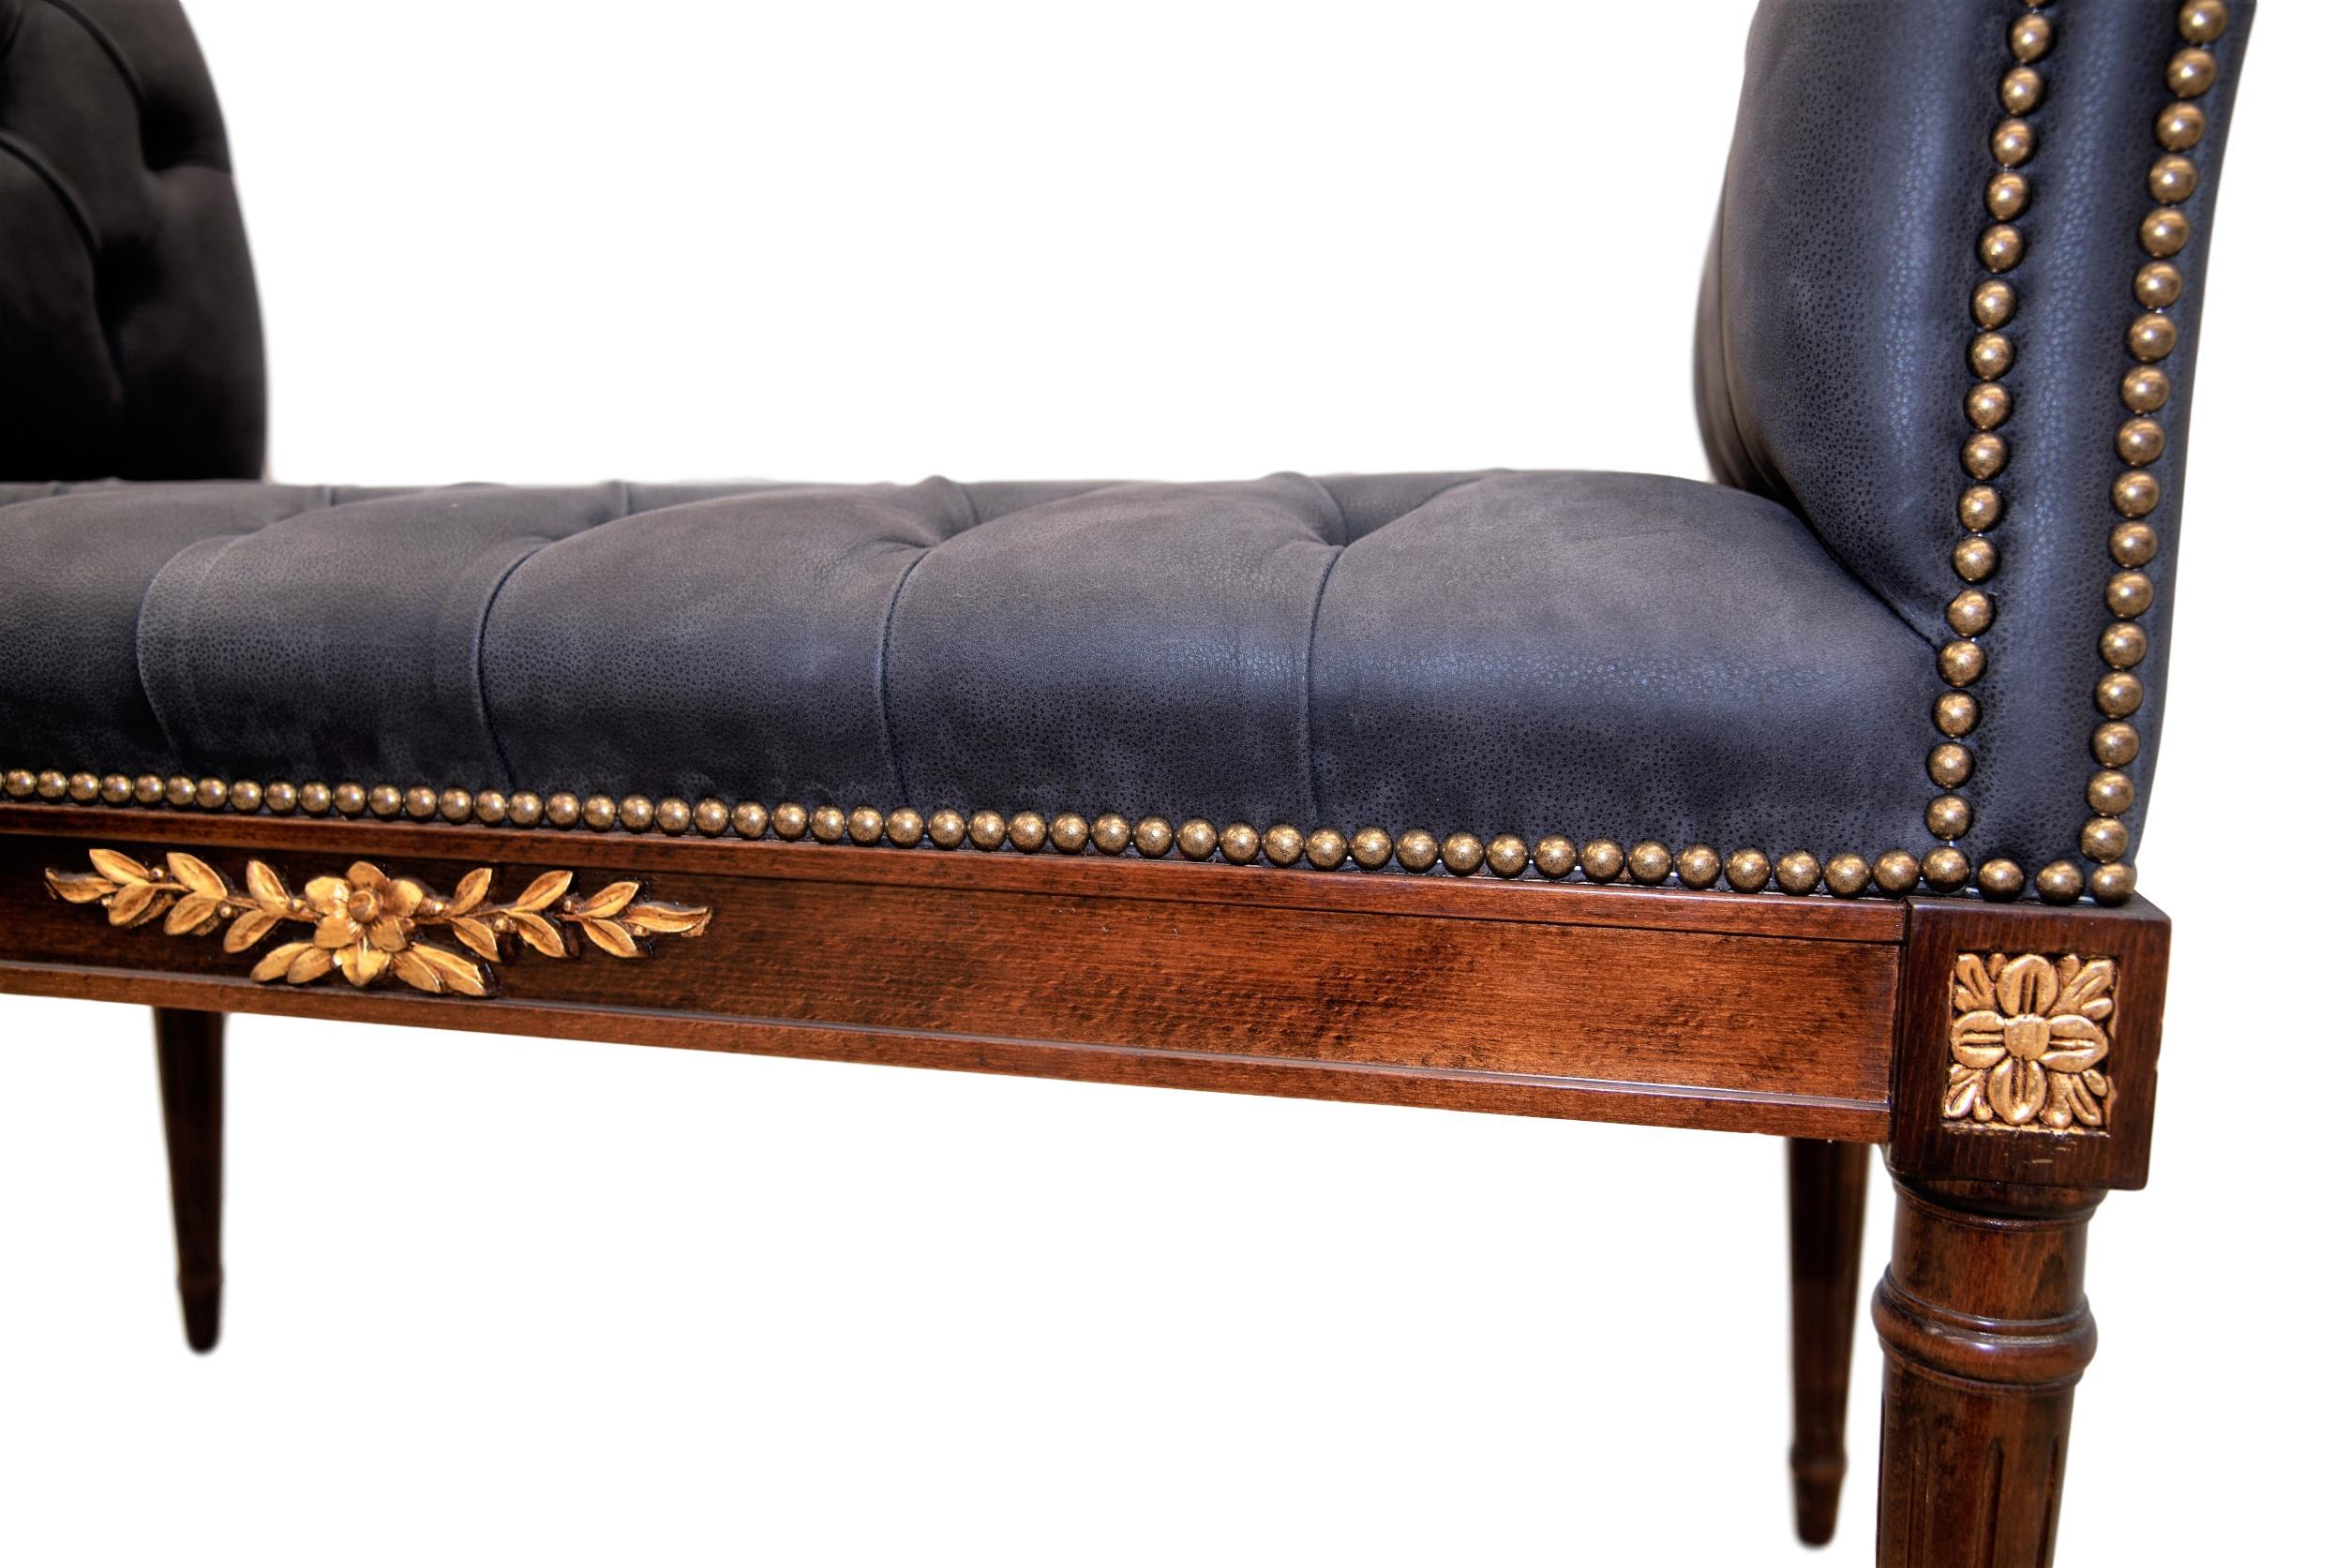 1980s Italian Walnut Button-Tufted Leather Upholstered Roll Arm Window Seat  (Louis XVI.)